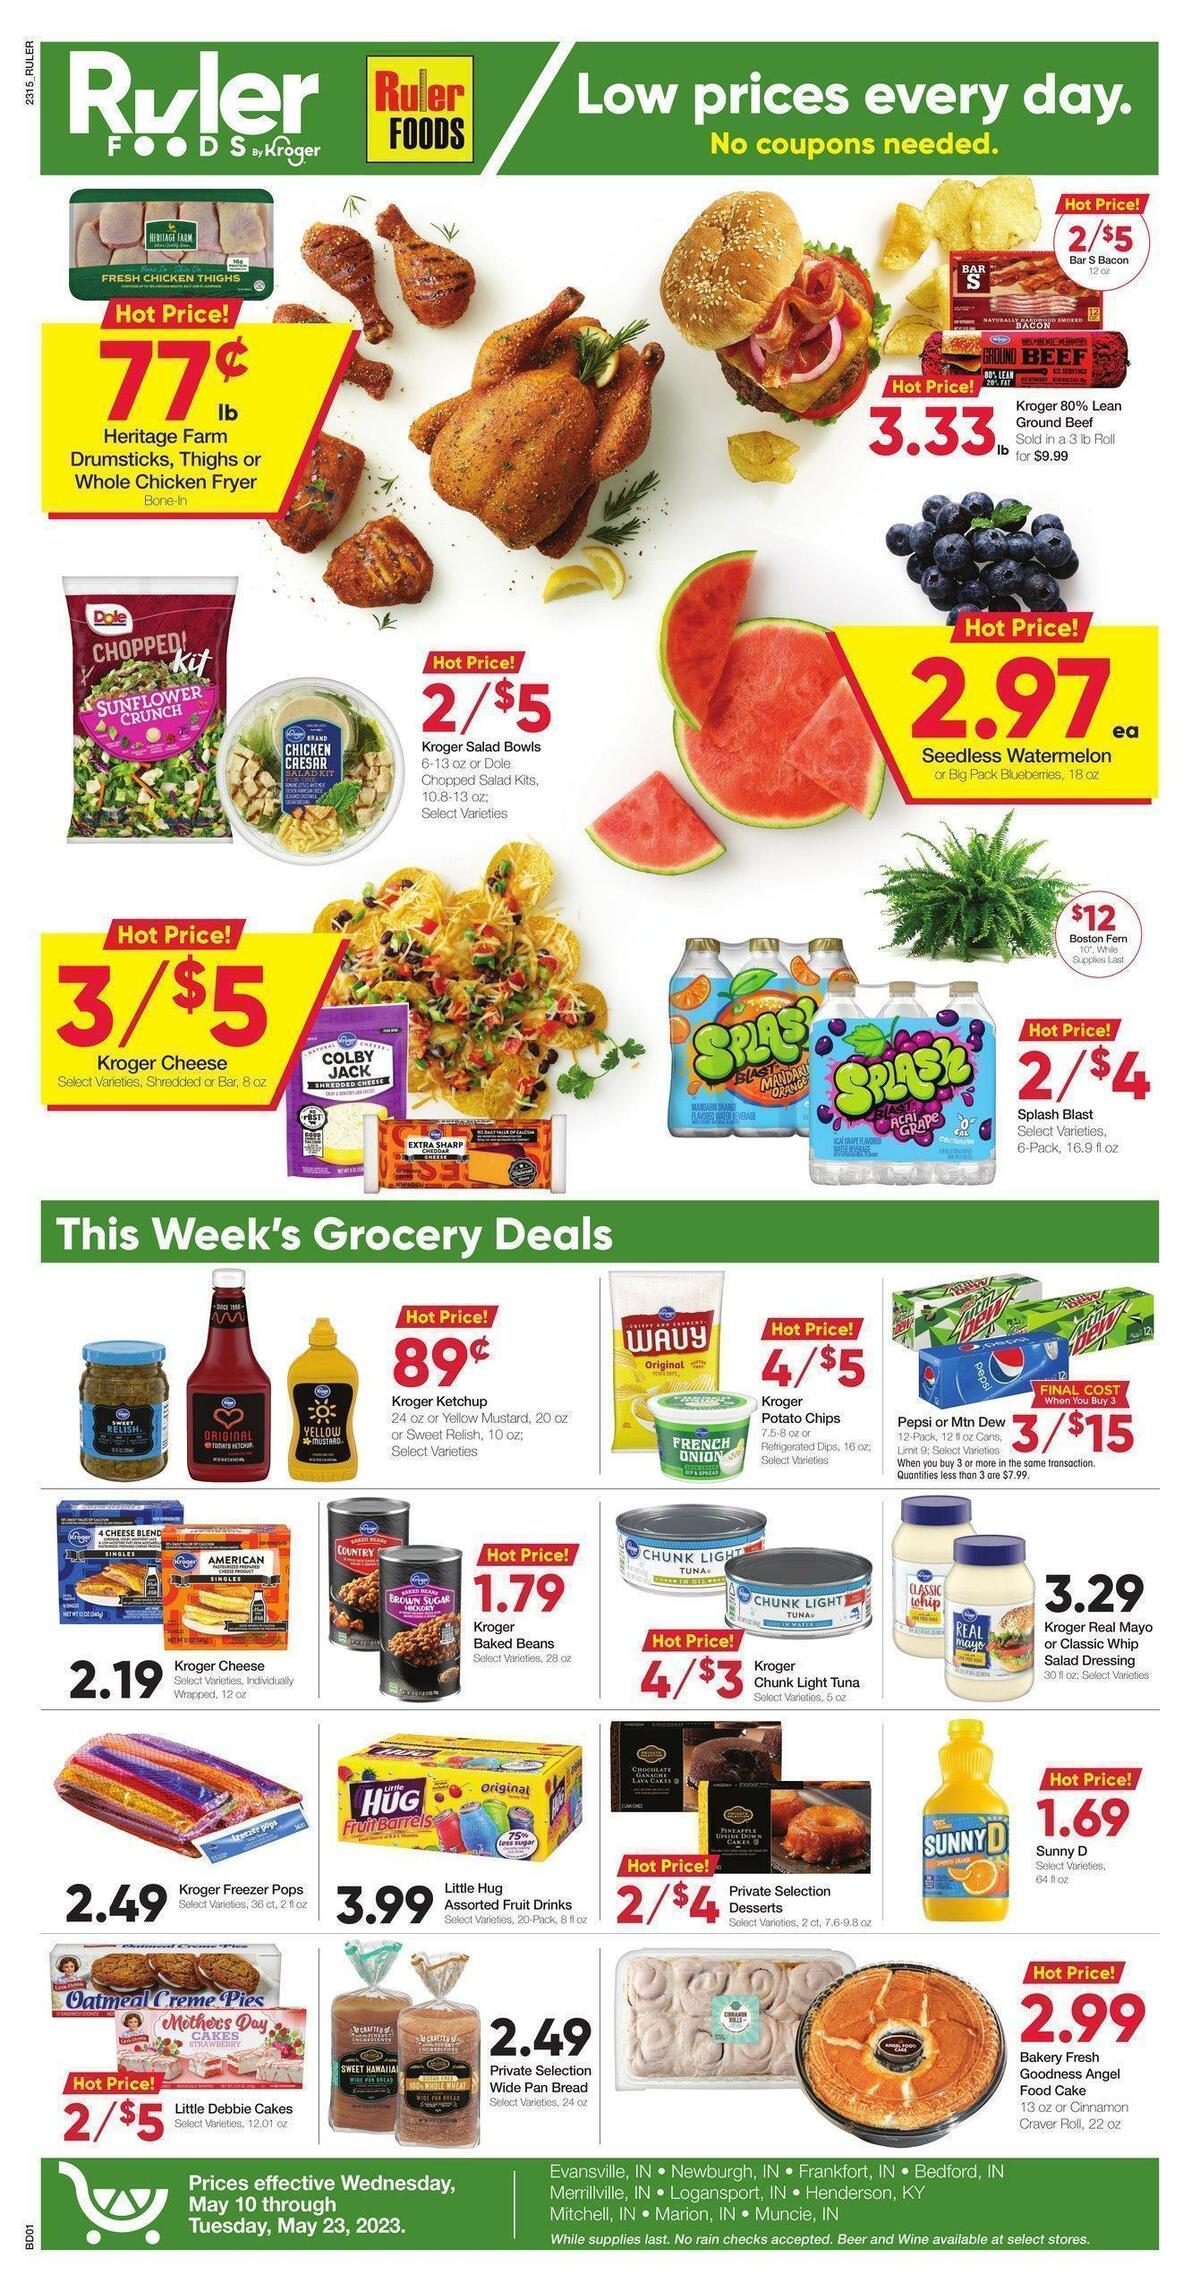 Ruler Foods Weekly Ad from May 10